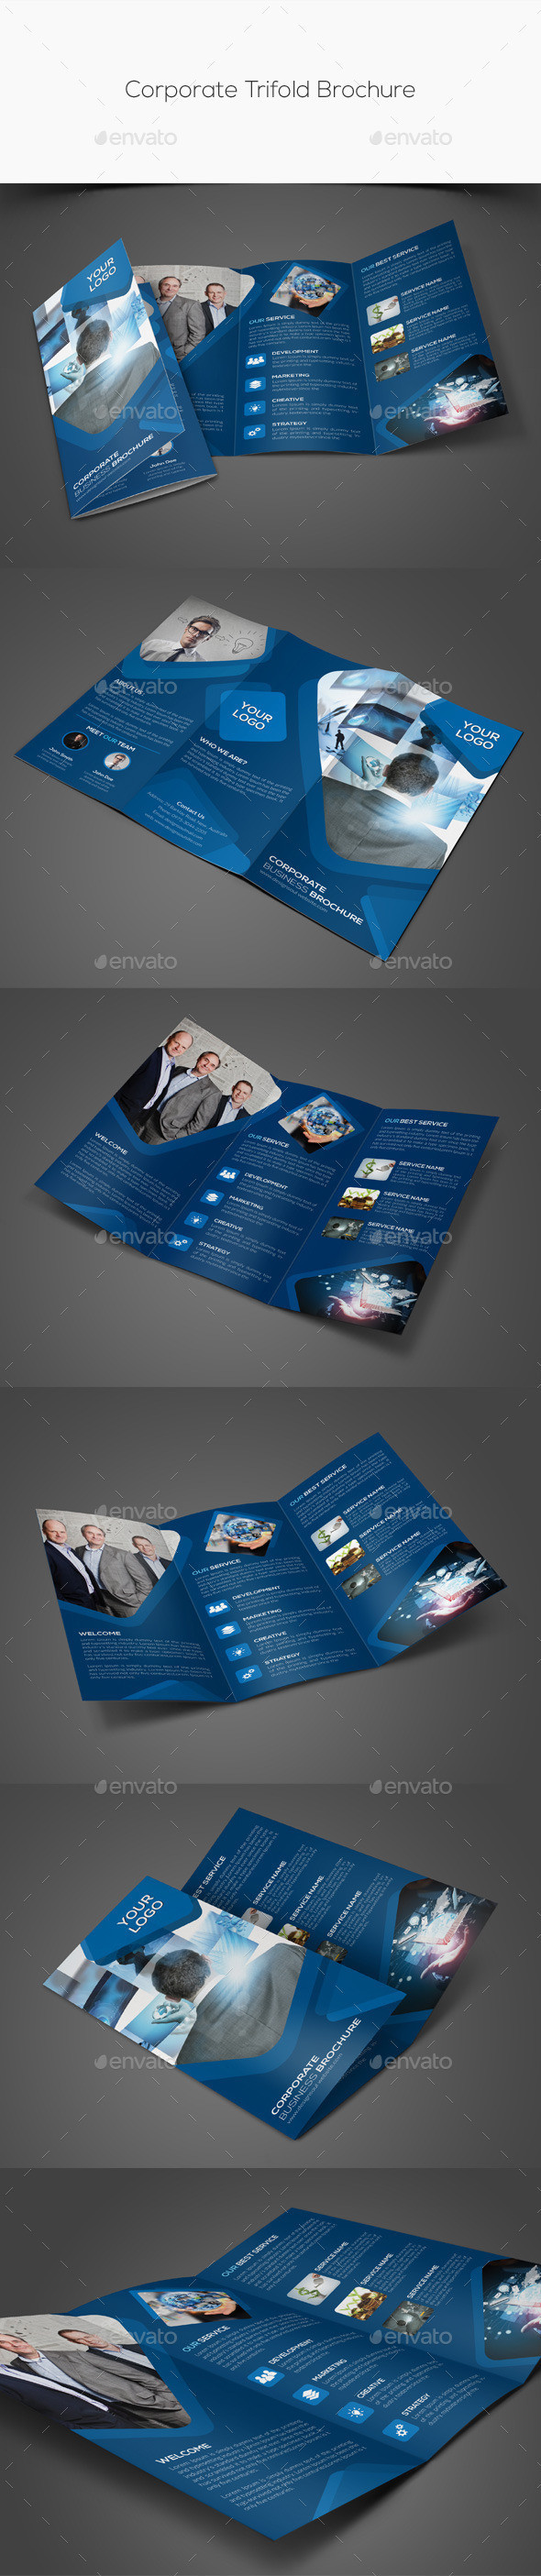 Corporate trifold brochure preview